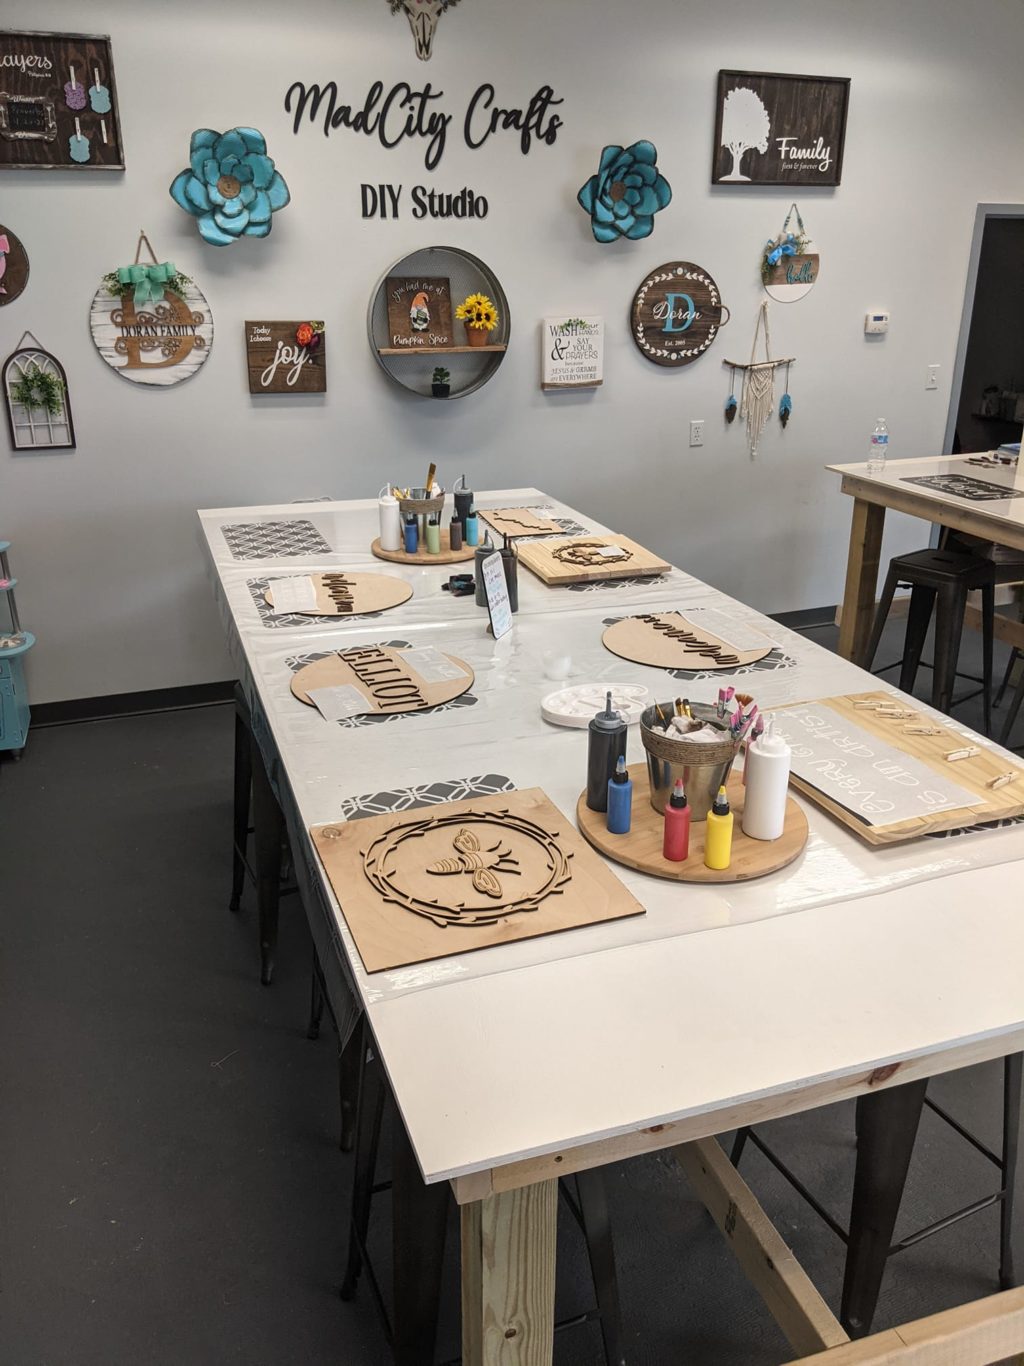 MadCity Crafts DIY Studio and Bakery